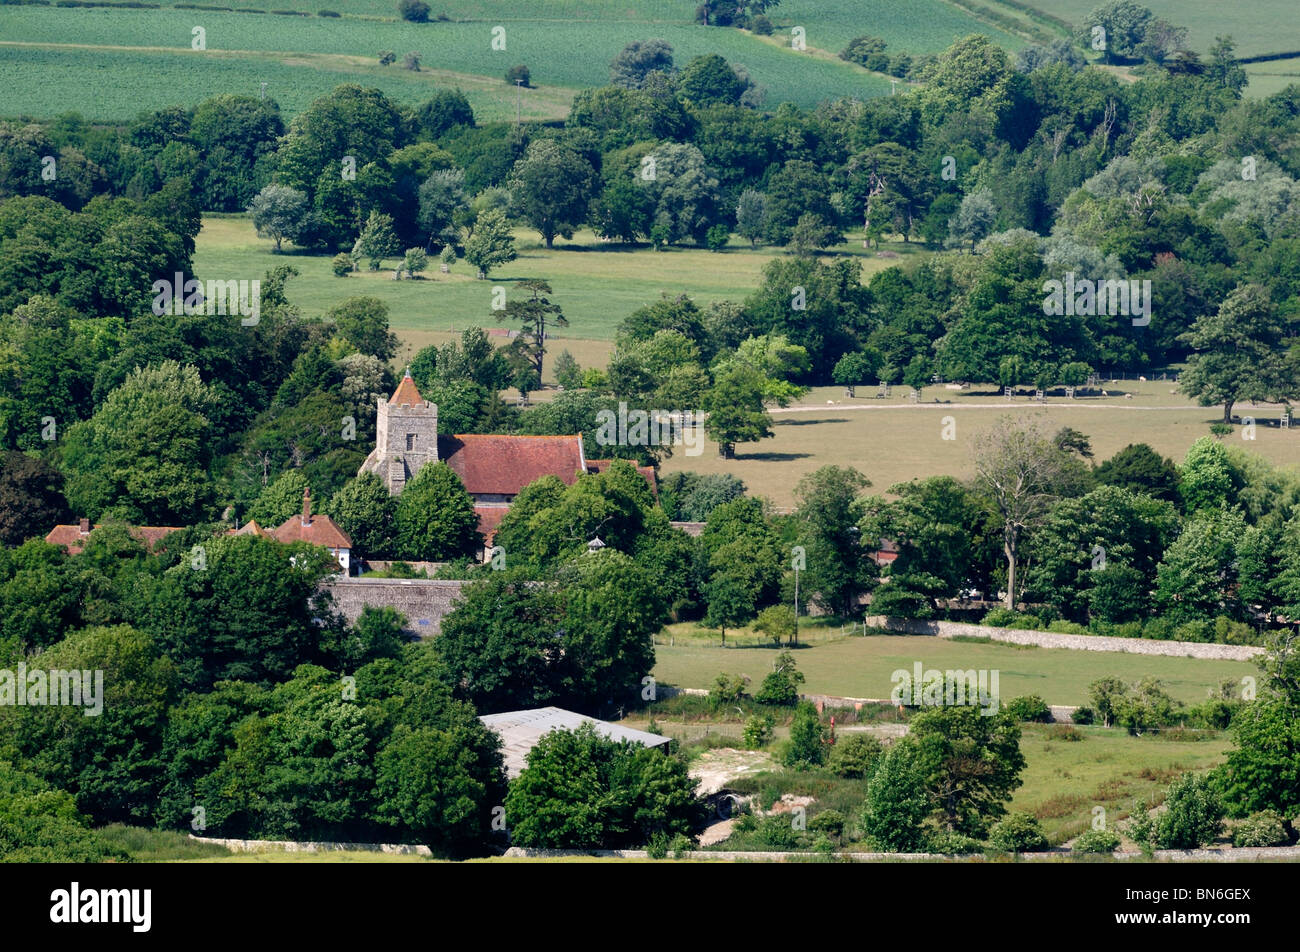 The view of St Peter's church in Firle from Firle Beacon in Sussex, England. Stock Photo